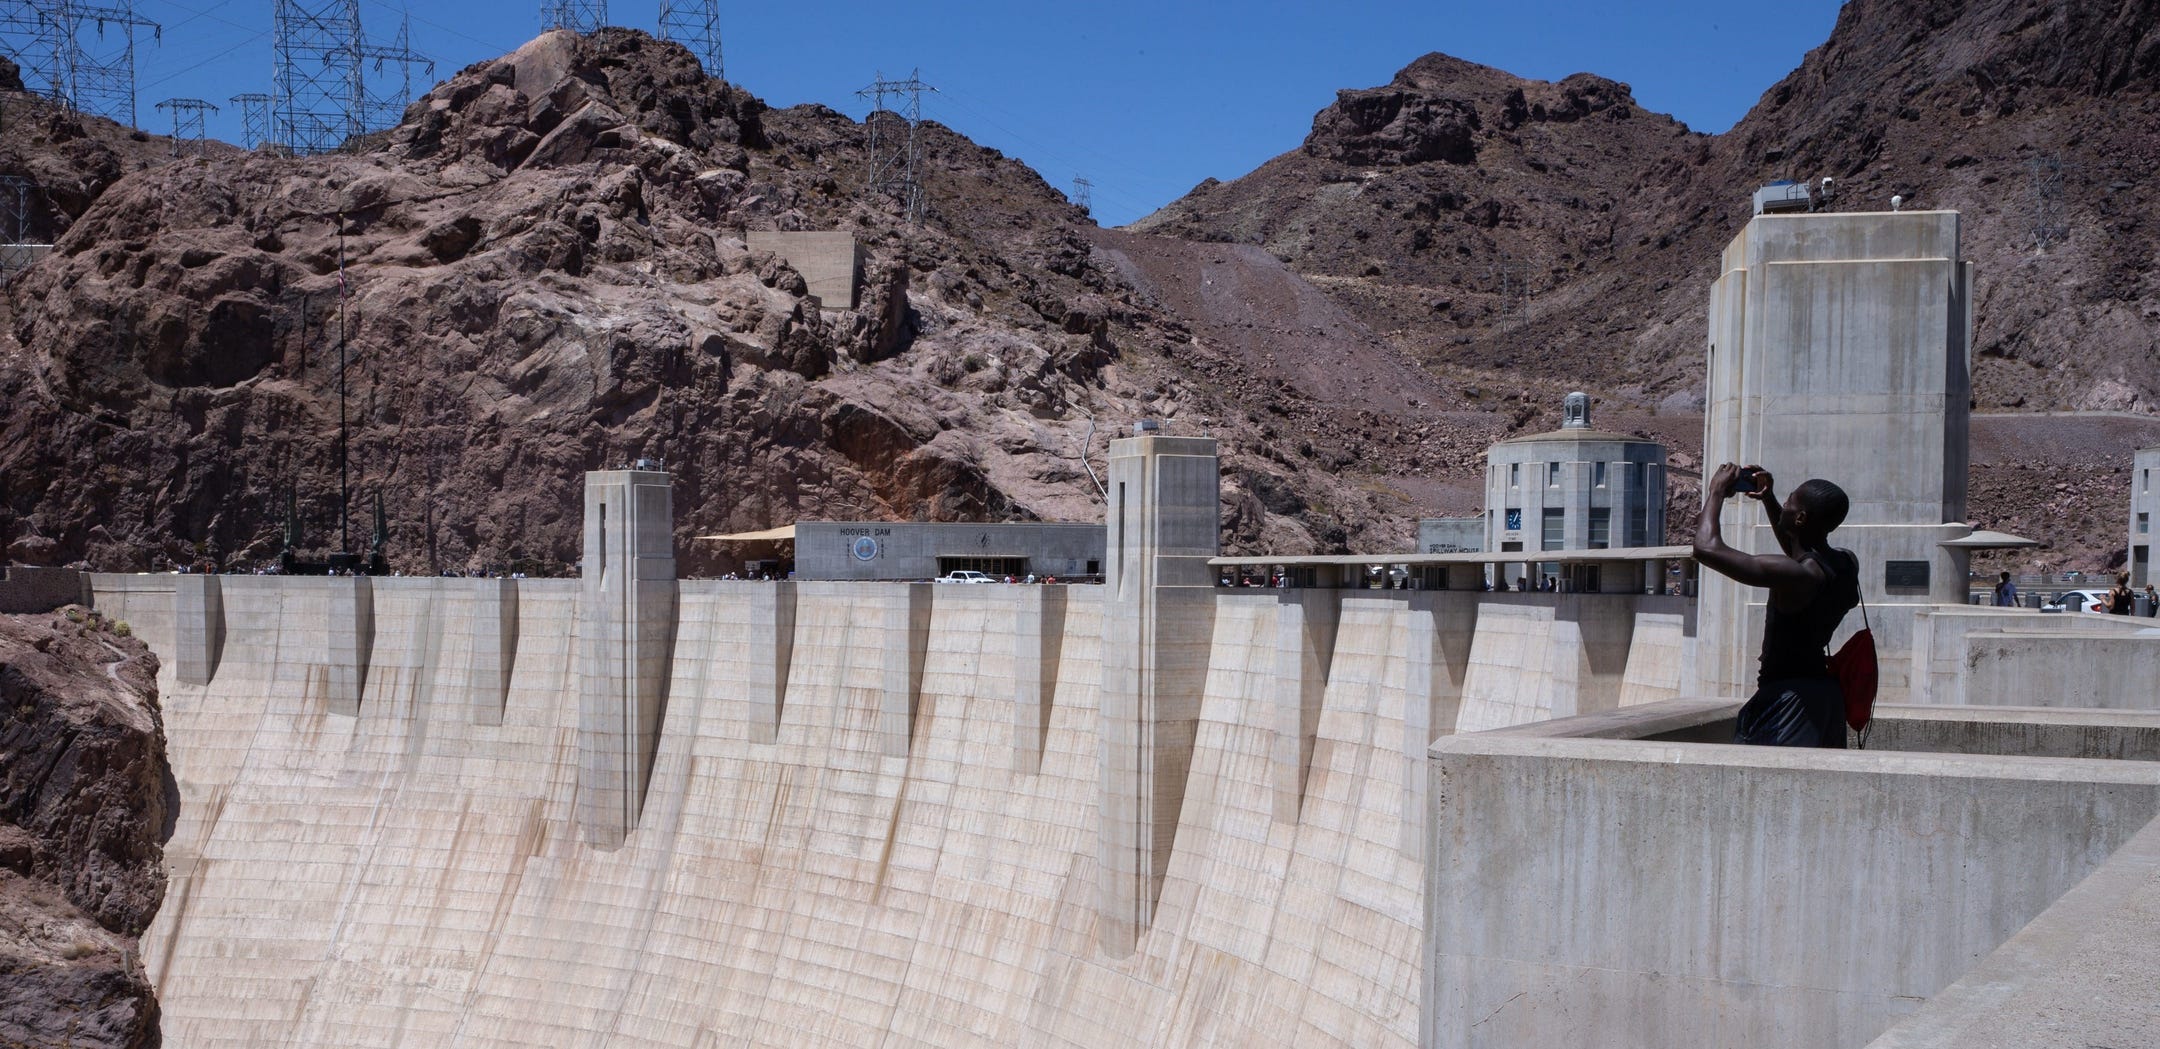 Hoover Dam water shortage Levels decline amid West dryness, droughts